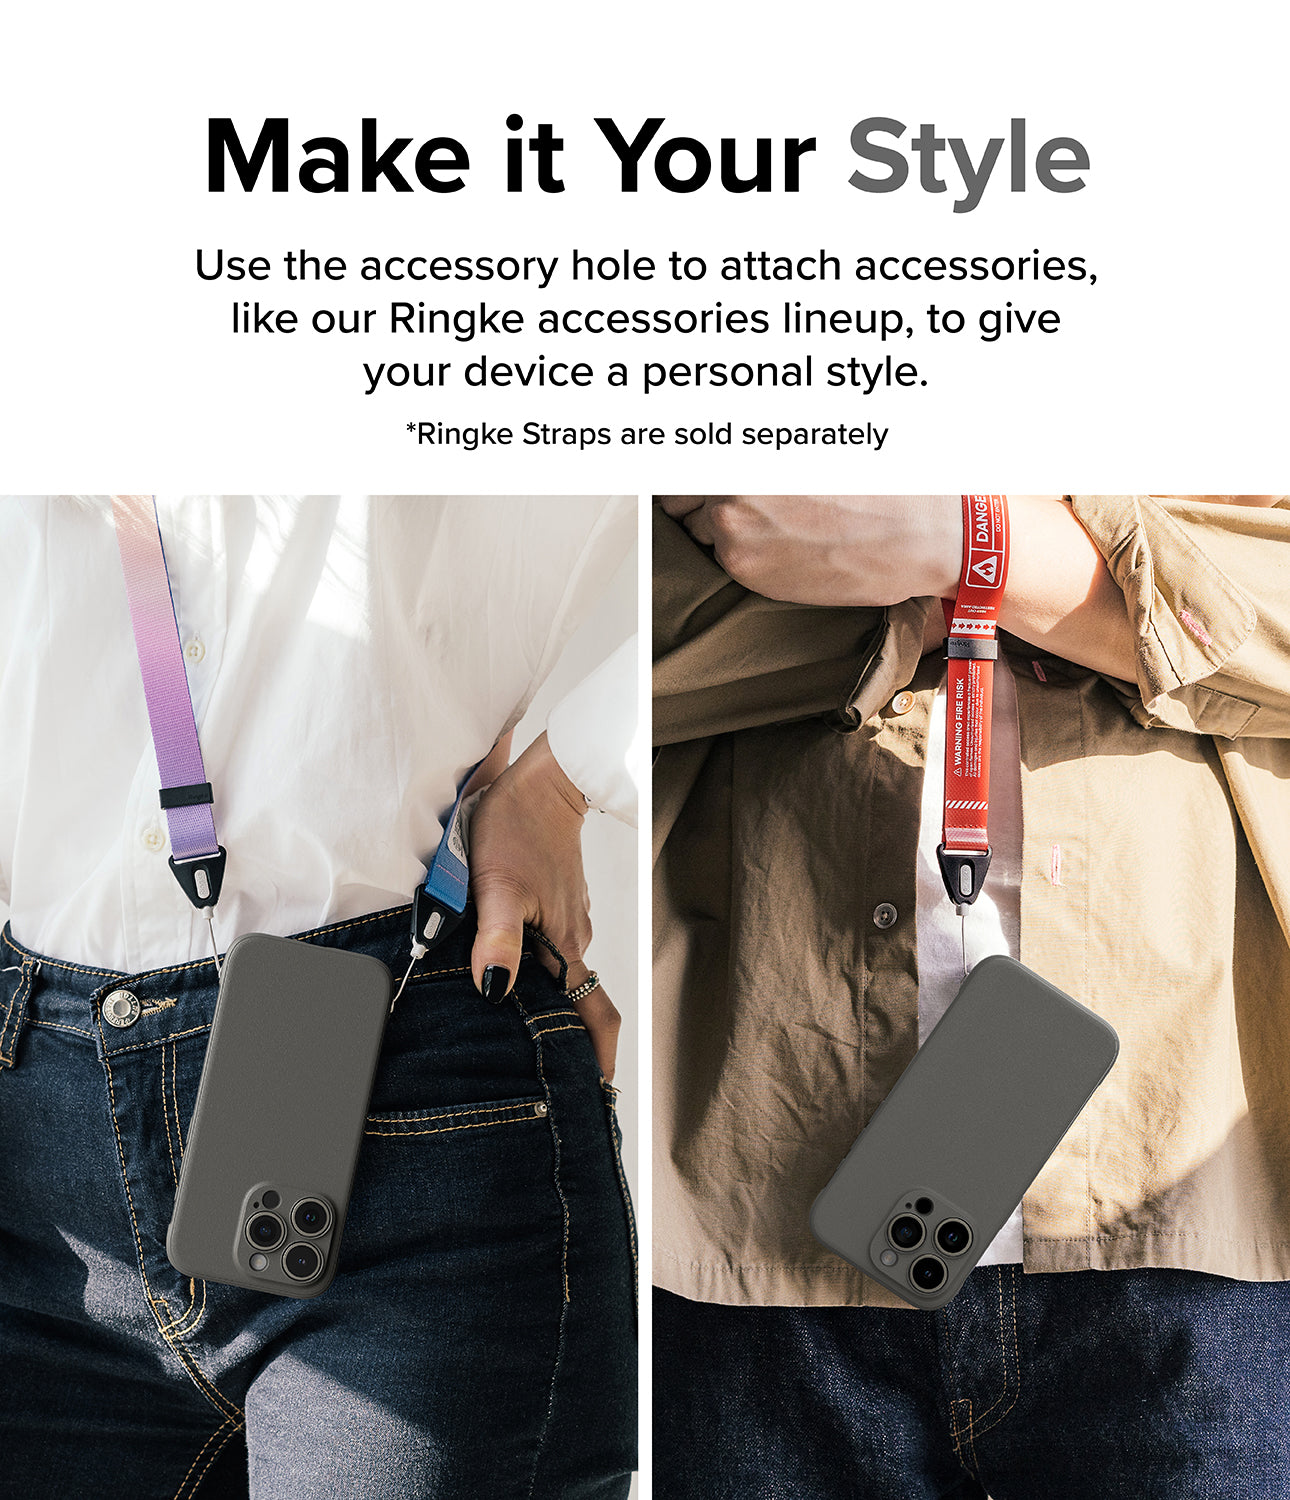 iPhone 15 Pro Max Case | Onyx - Gray - Make it Your Style. Use the accessory hole to attach accessories, like our Ringke accessories lineup, to give your device a personal style.